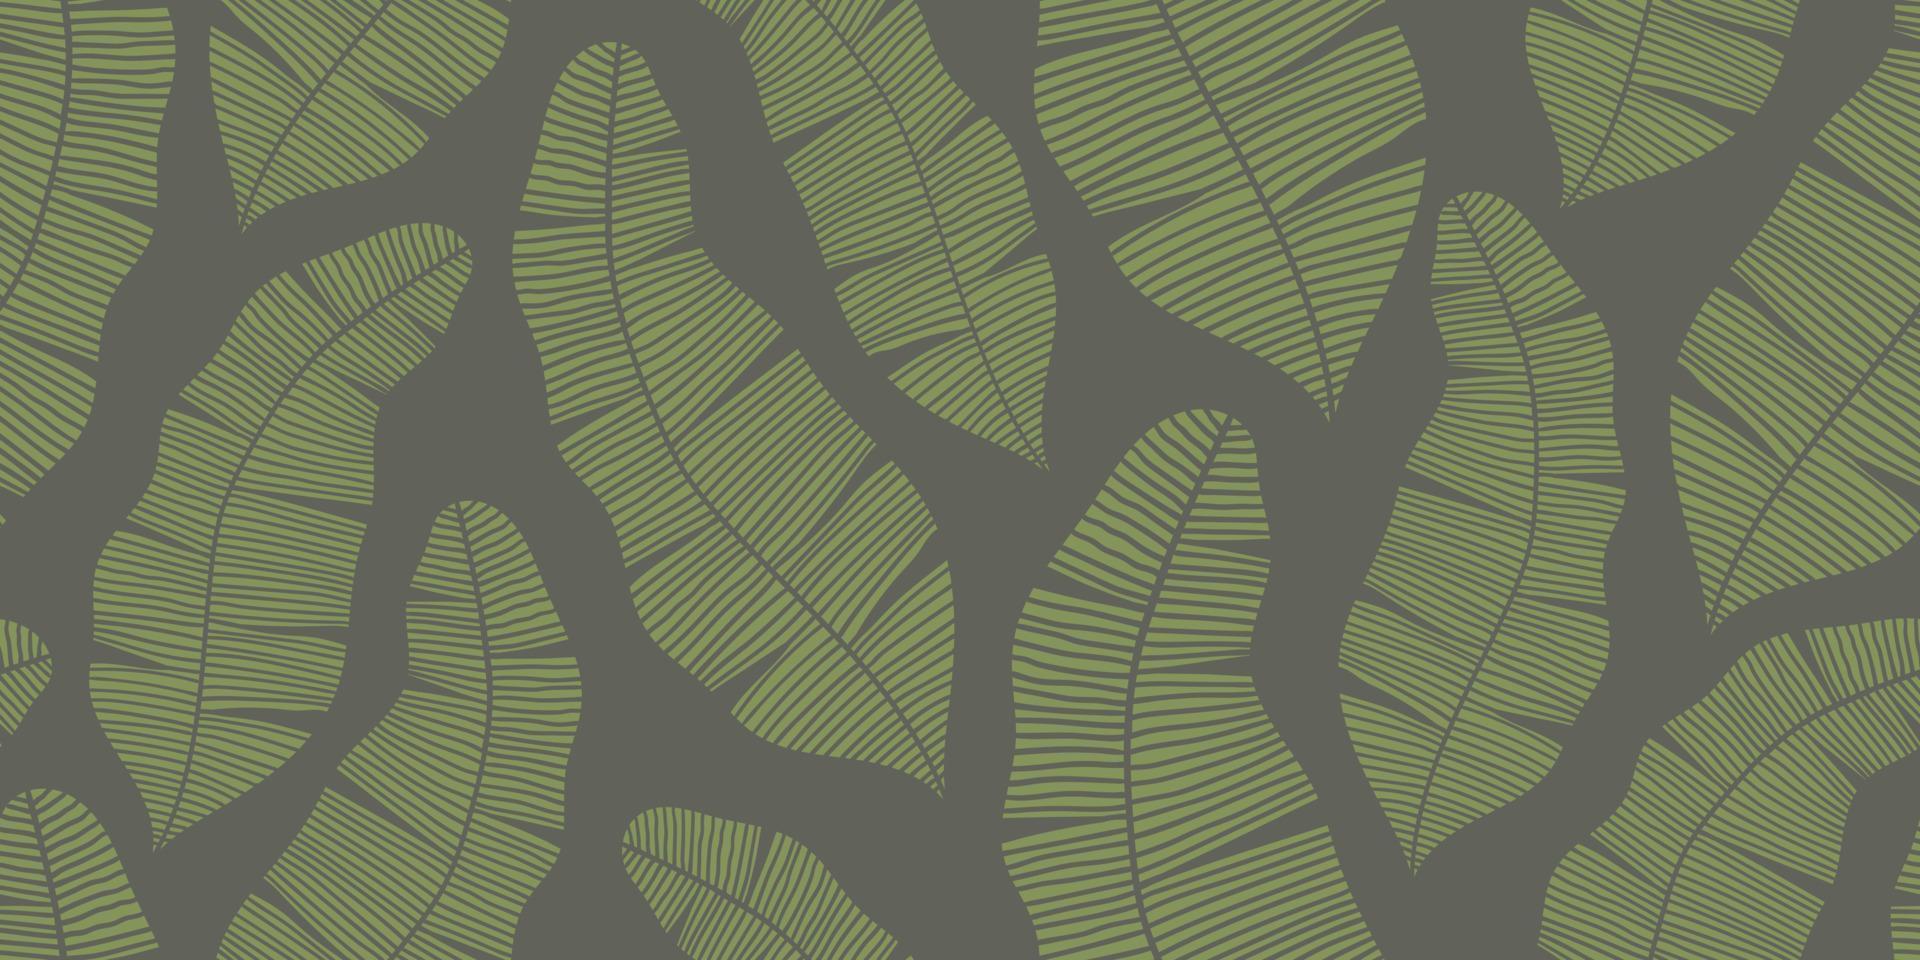 ABSTRACT VECTOR SEAMLESS GRAY BANNER WITH GREEN BANANA LEAVES